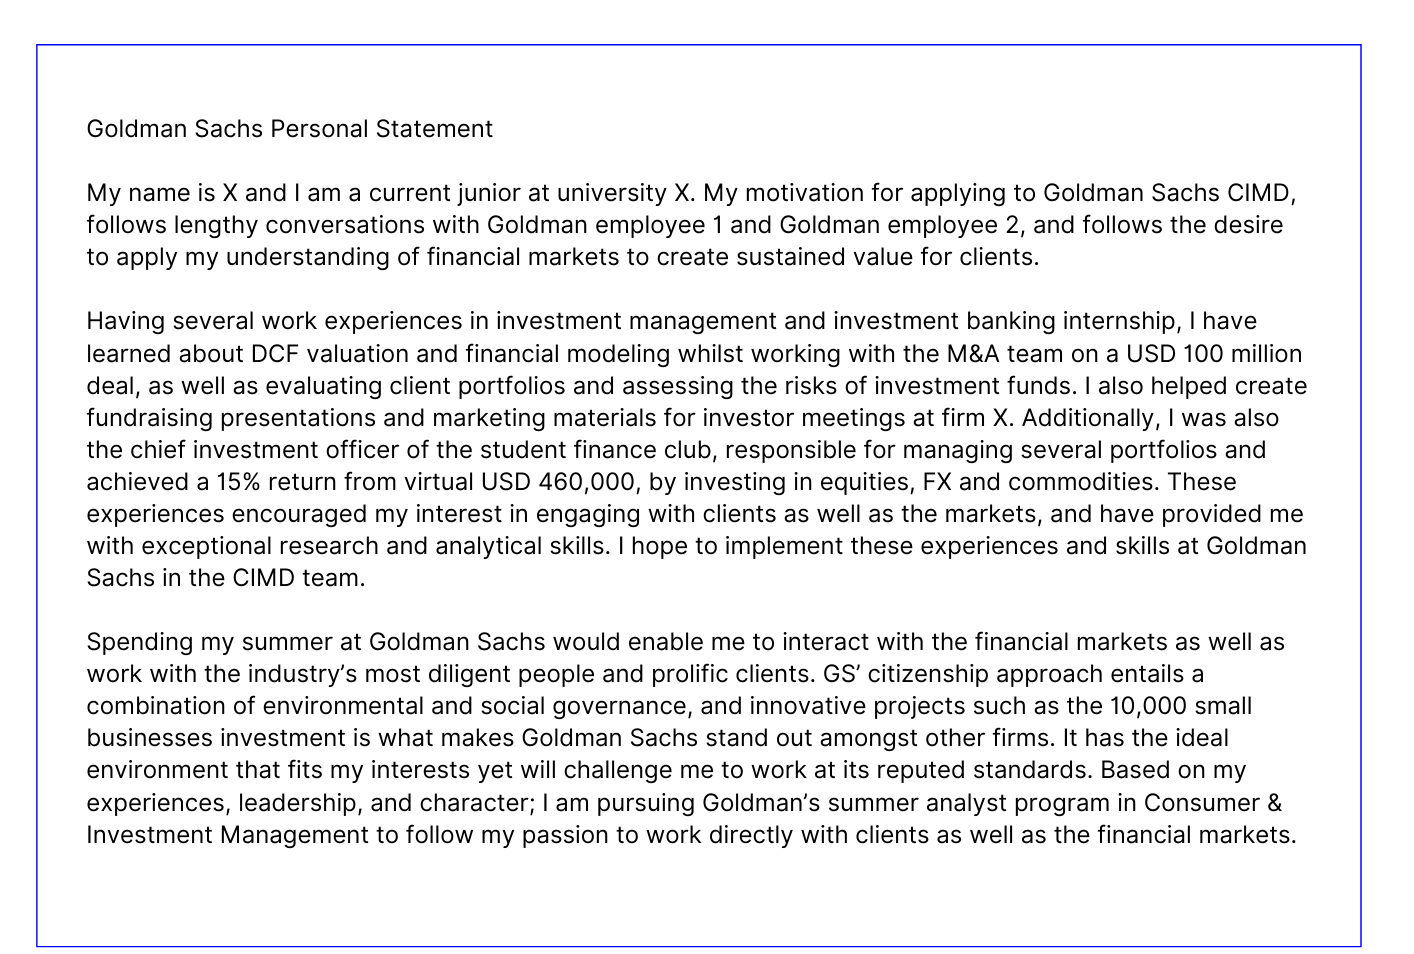 example cover letter goldman sachs